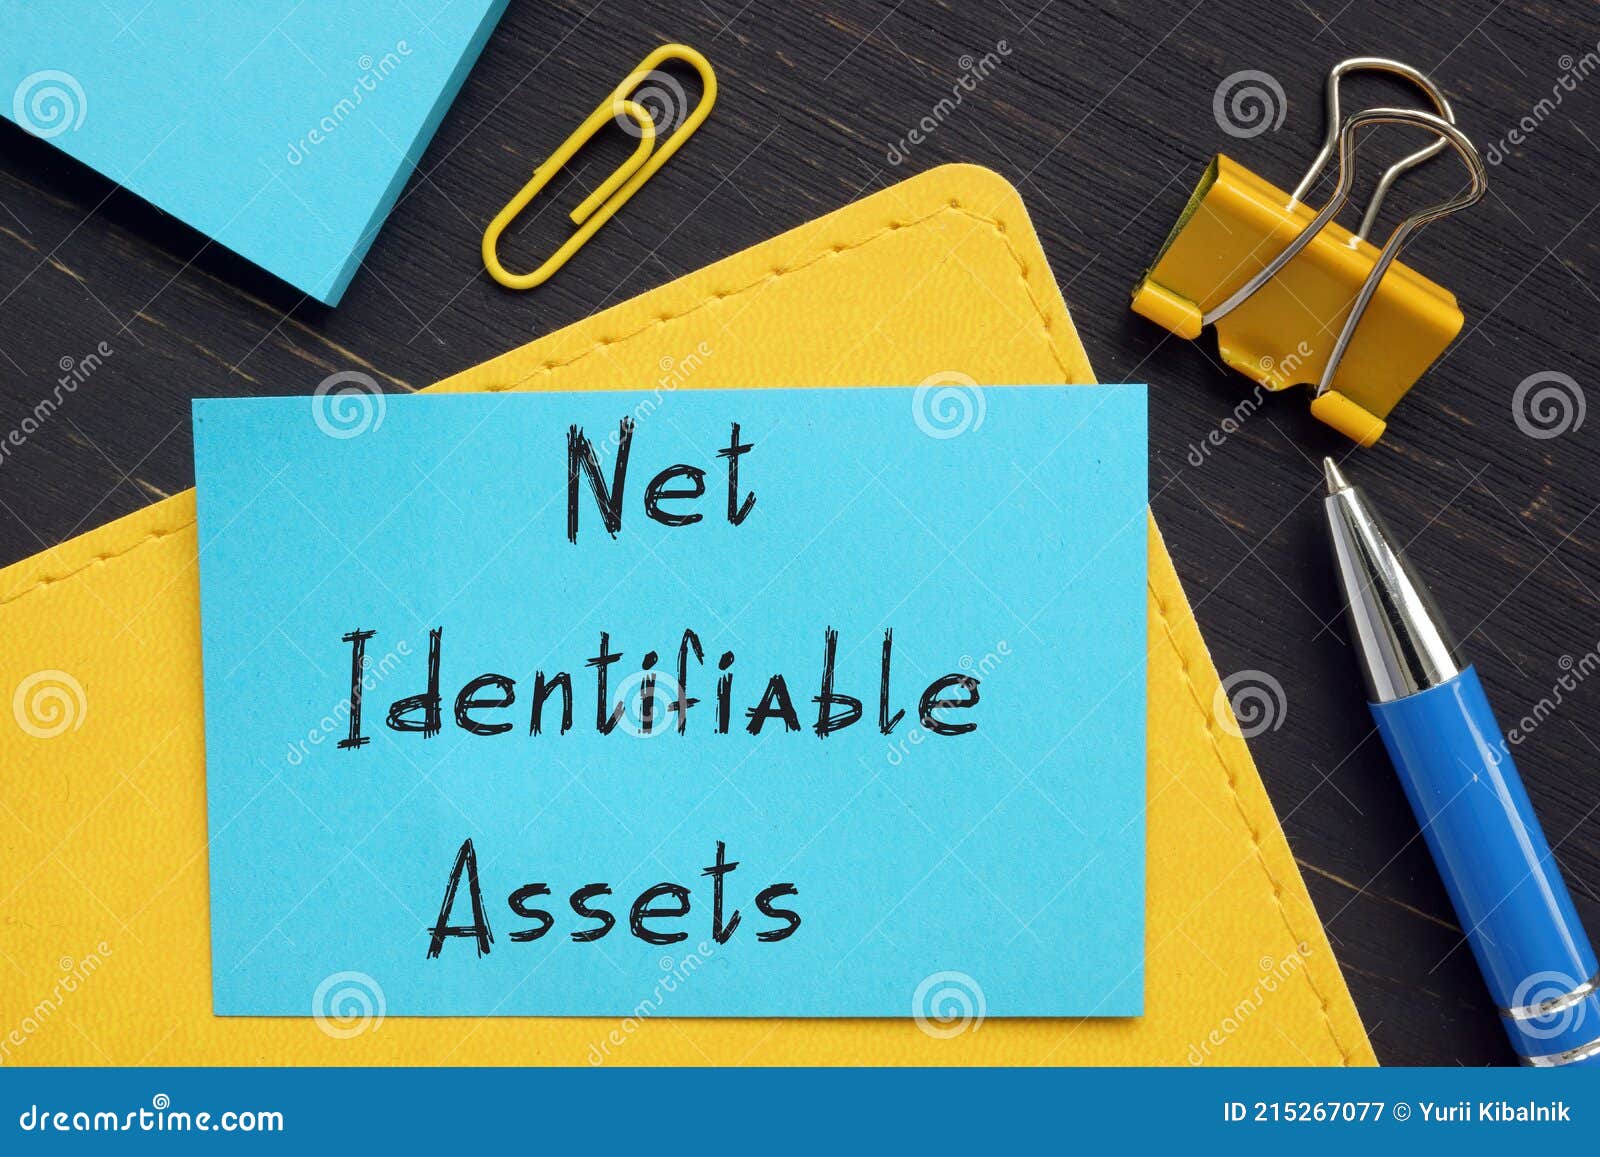 net identifiable assets sign on the page